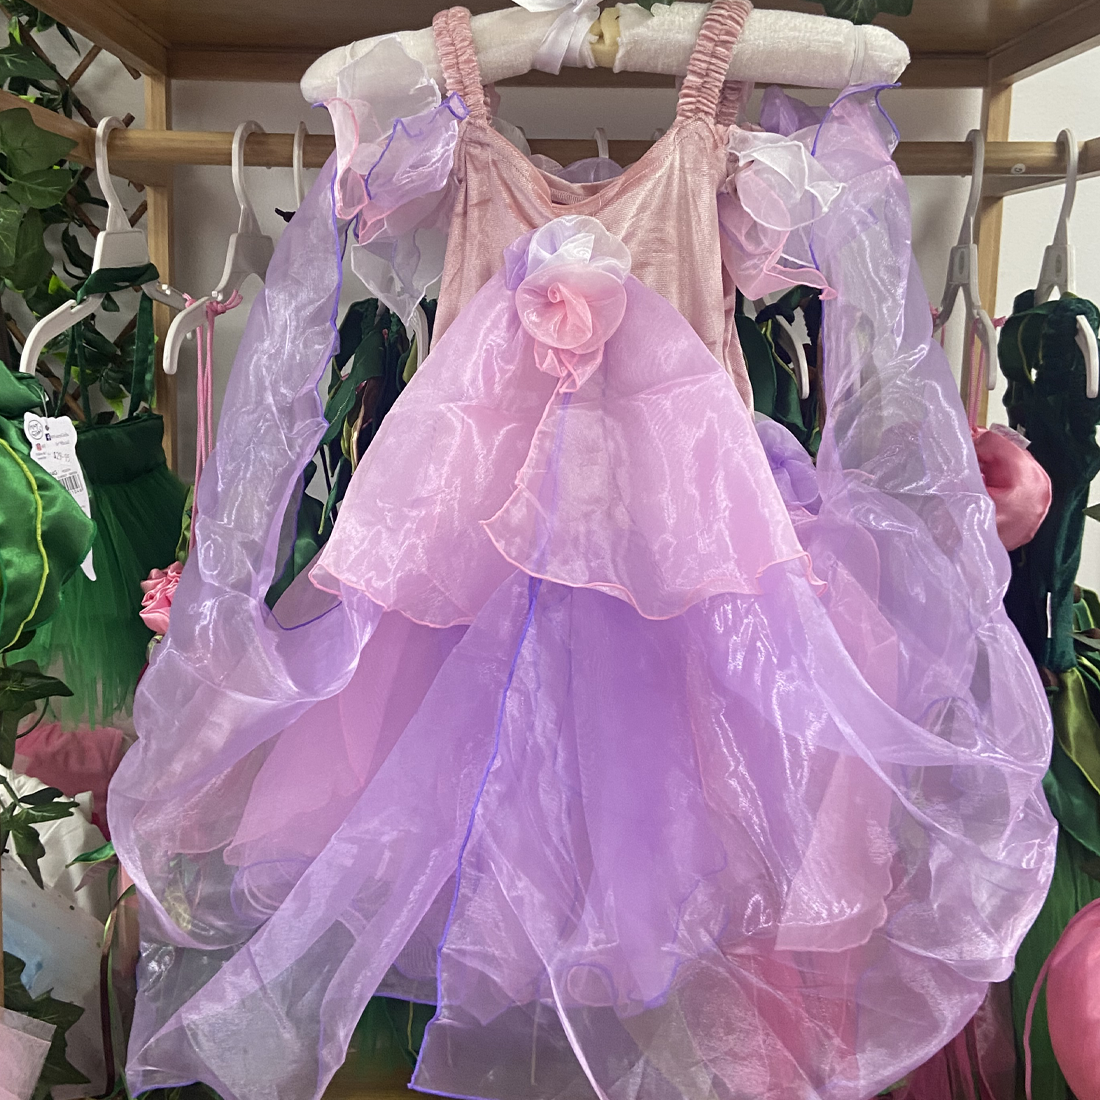 Girls Forest Fairy Dress - Pale Pink and Lilac